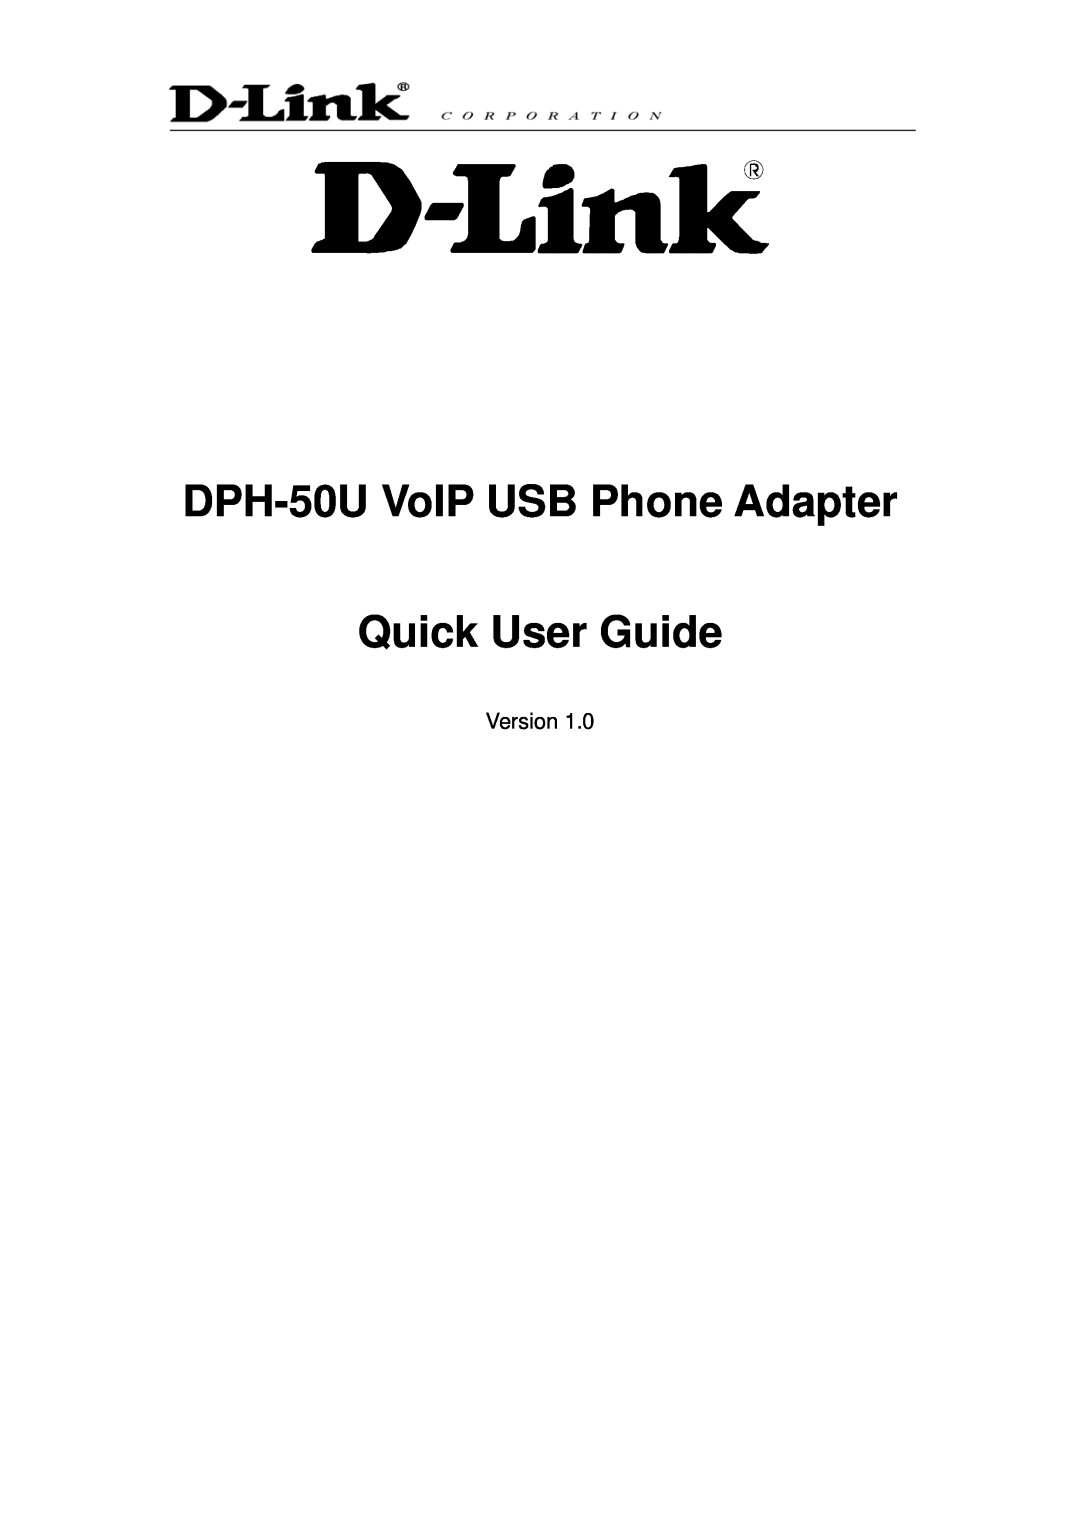 D-Link DPH-50U manual Skype USB Phone Adapter, Product Data Sheet, Use Your Existing Phone For Skype, Convenient Features 